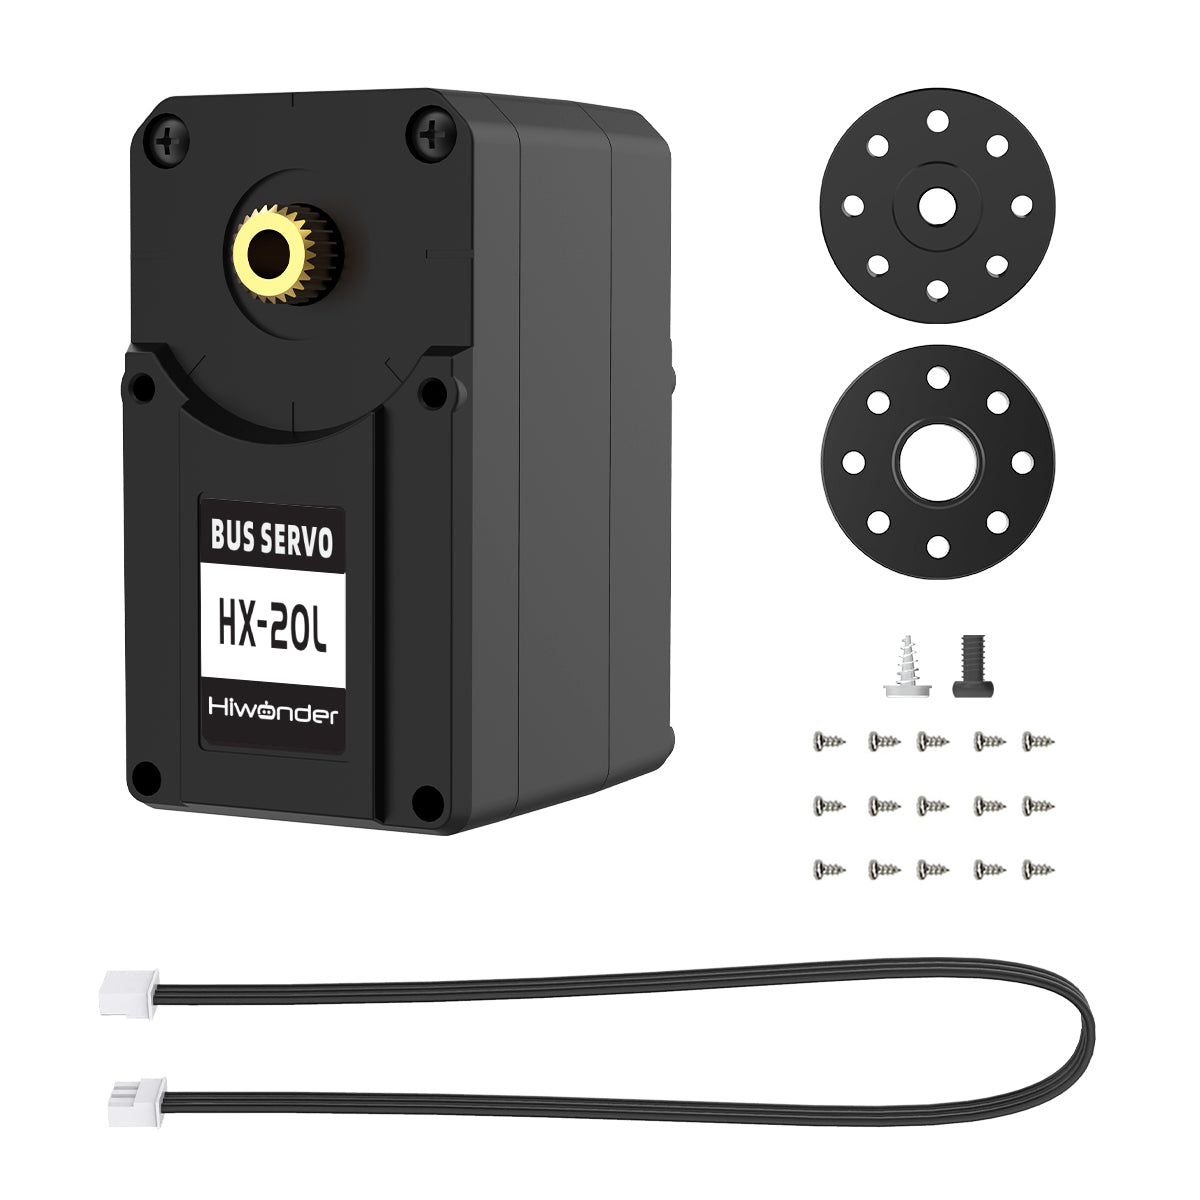 Hiwonder HX-20L 20kg High Torque Serial Bus Servo with Real-time Feedback, Full Metal Gear Dual Shaft Bearing for RC Robot